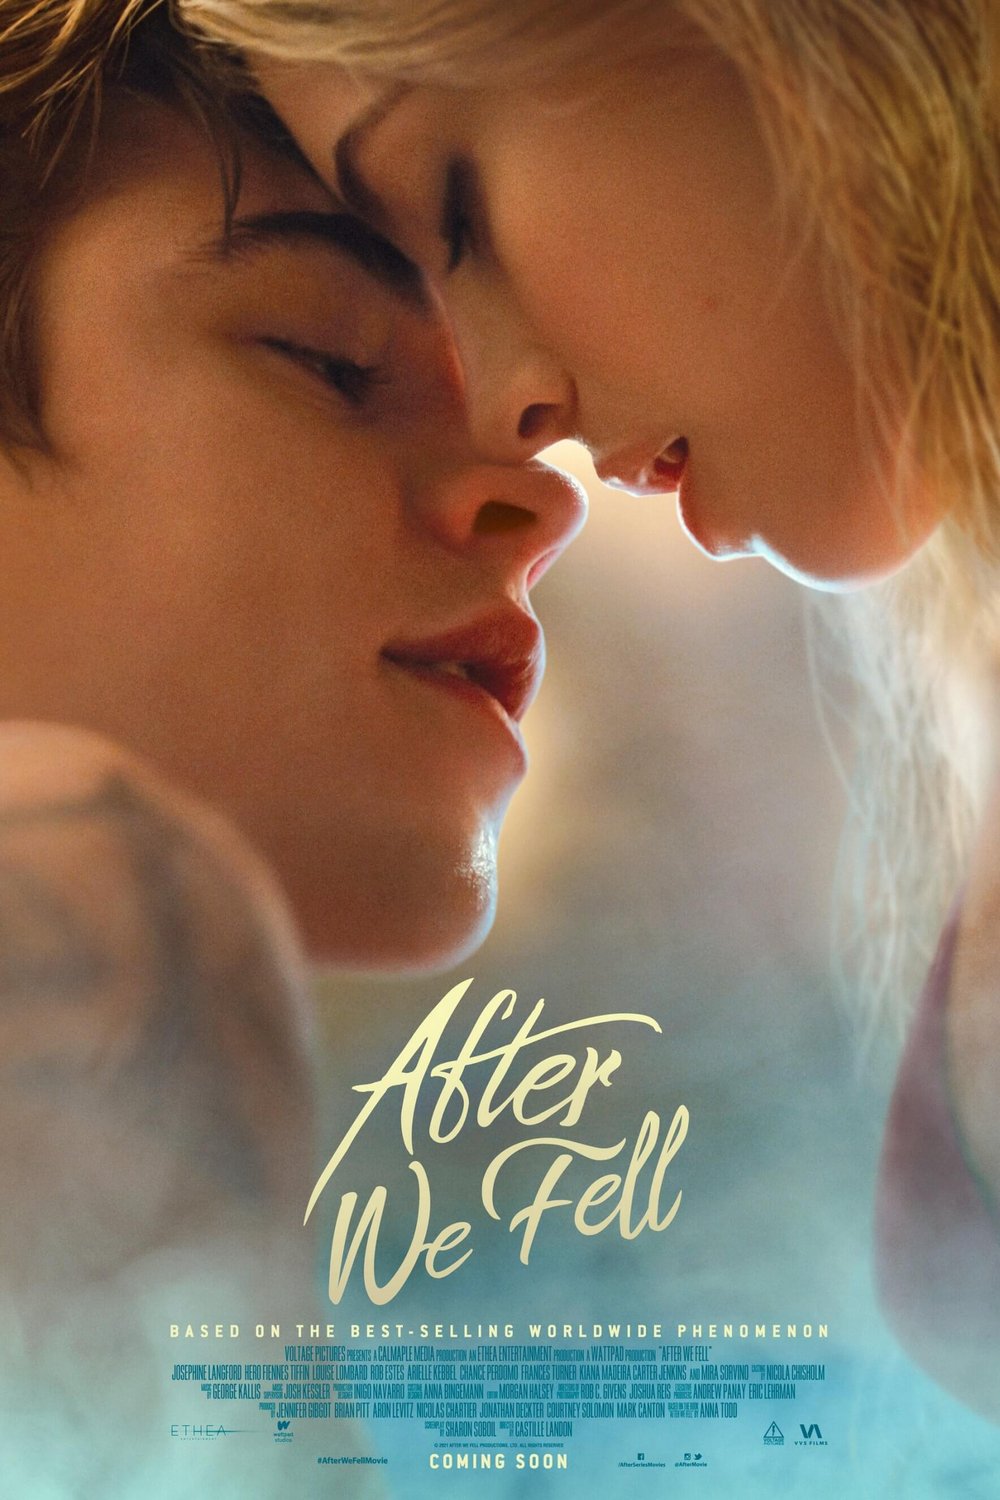 Poster of the movie After We Fell